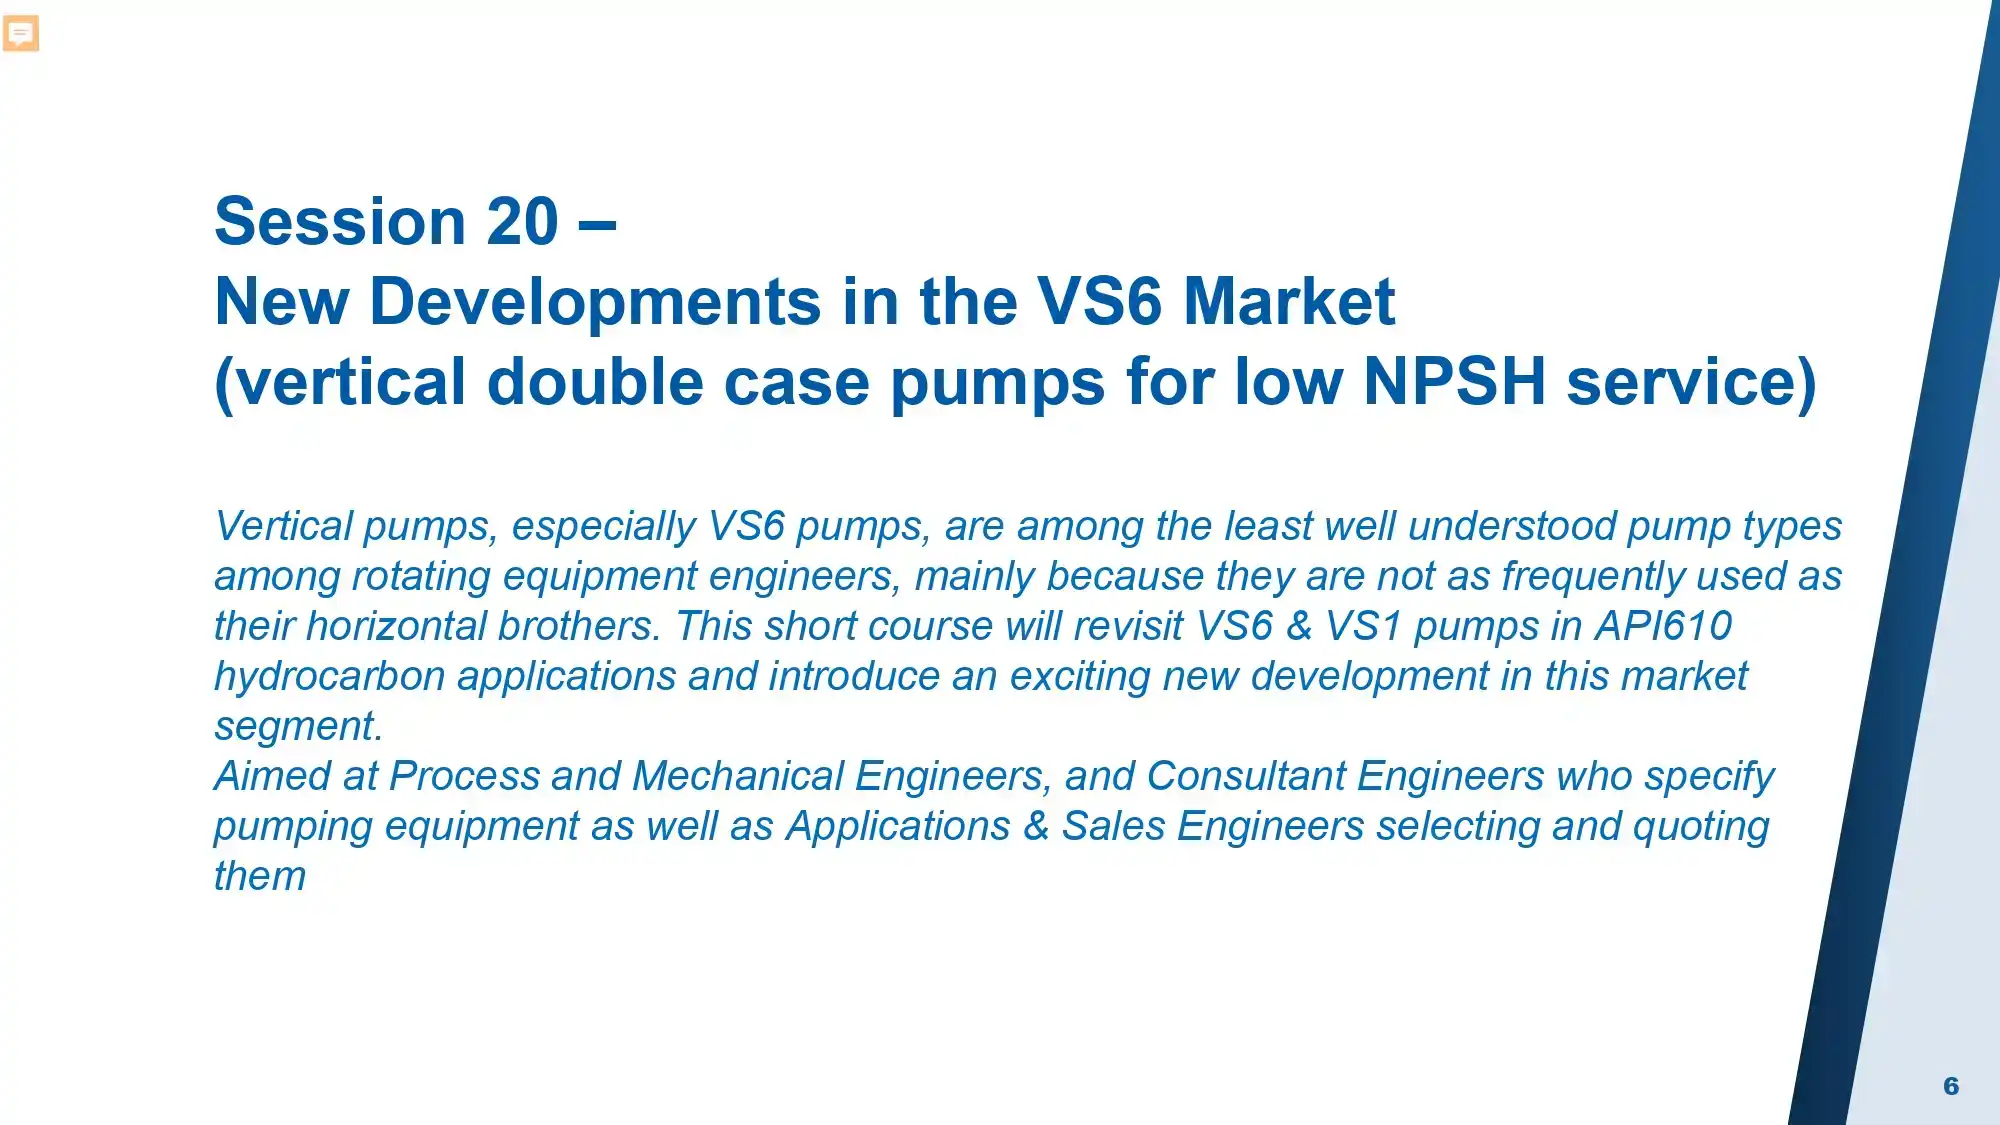 Session 20 –New Developments in the VS6 Market (vertical double case pumps for low NPSH service)